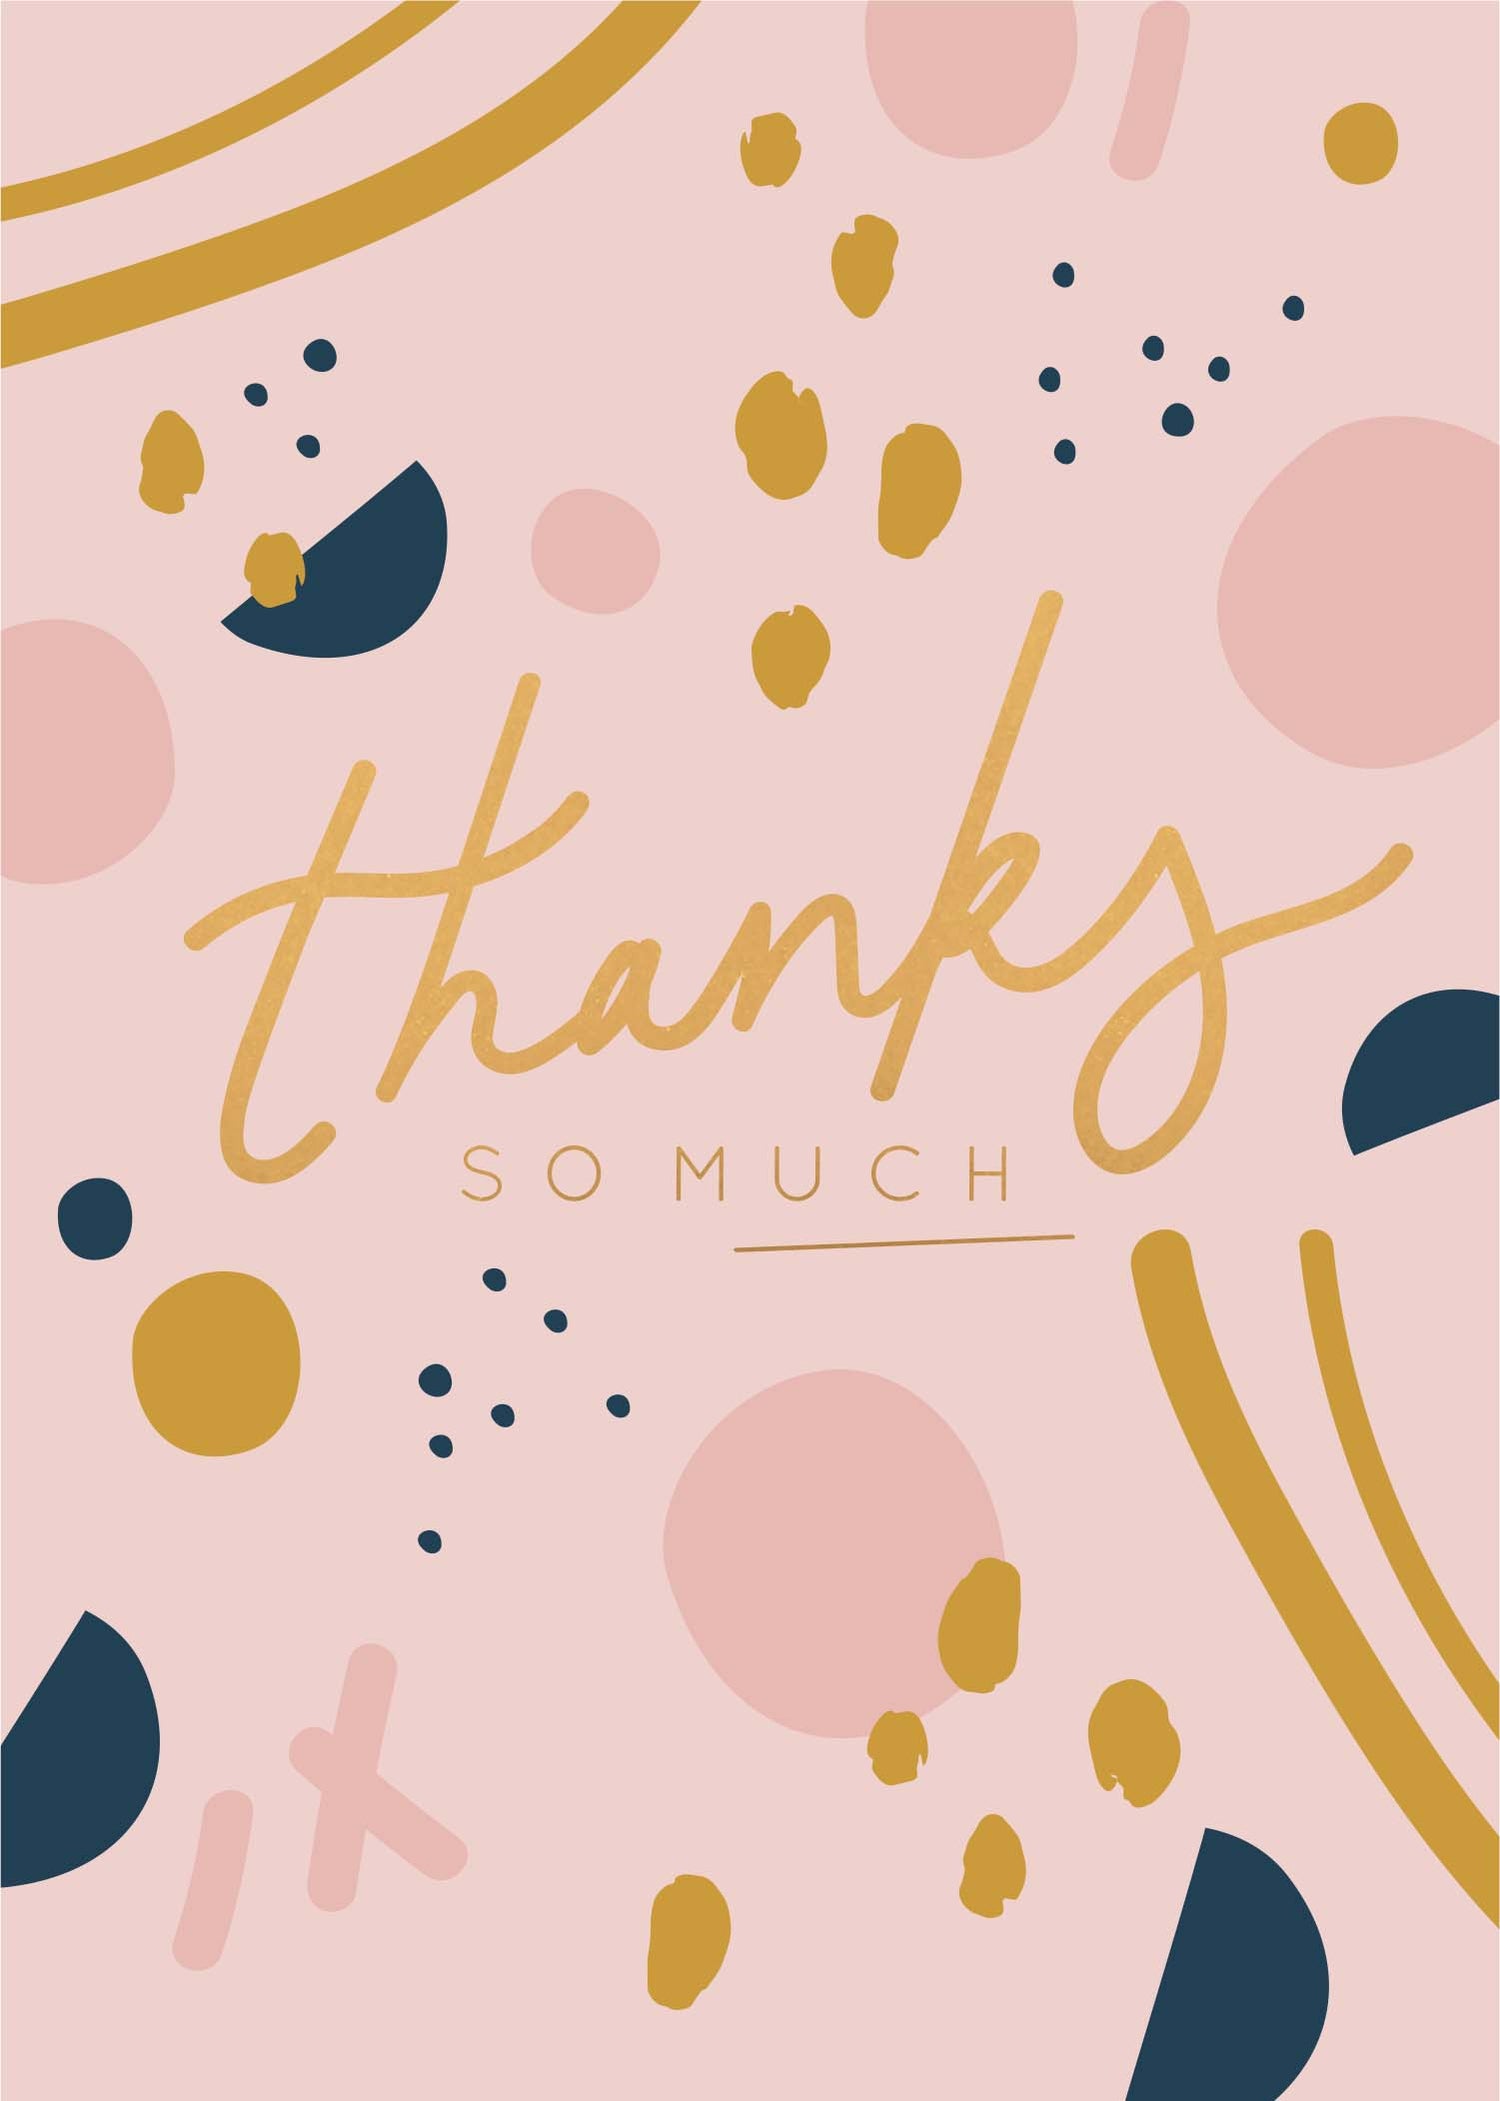 Stationery - Cards - Thank you Cards